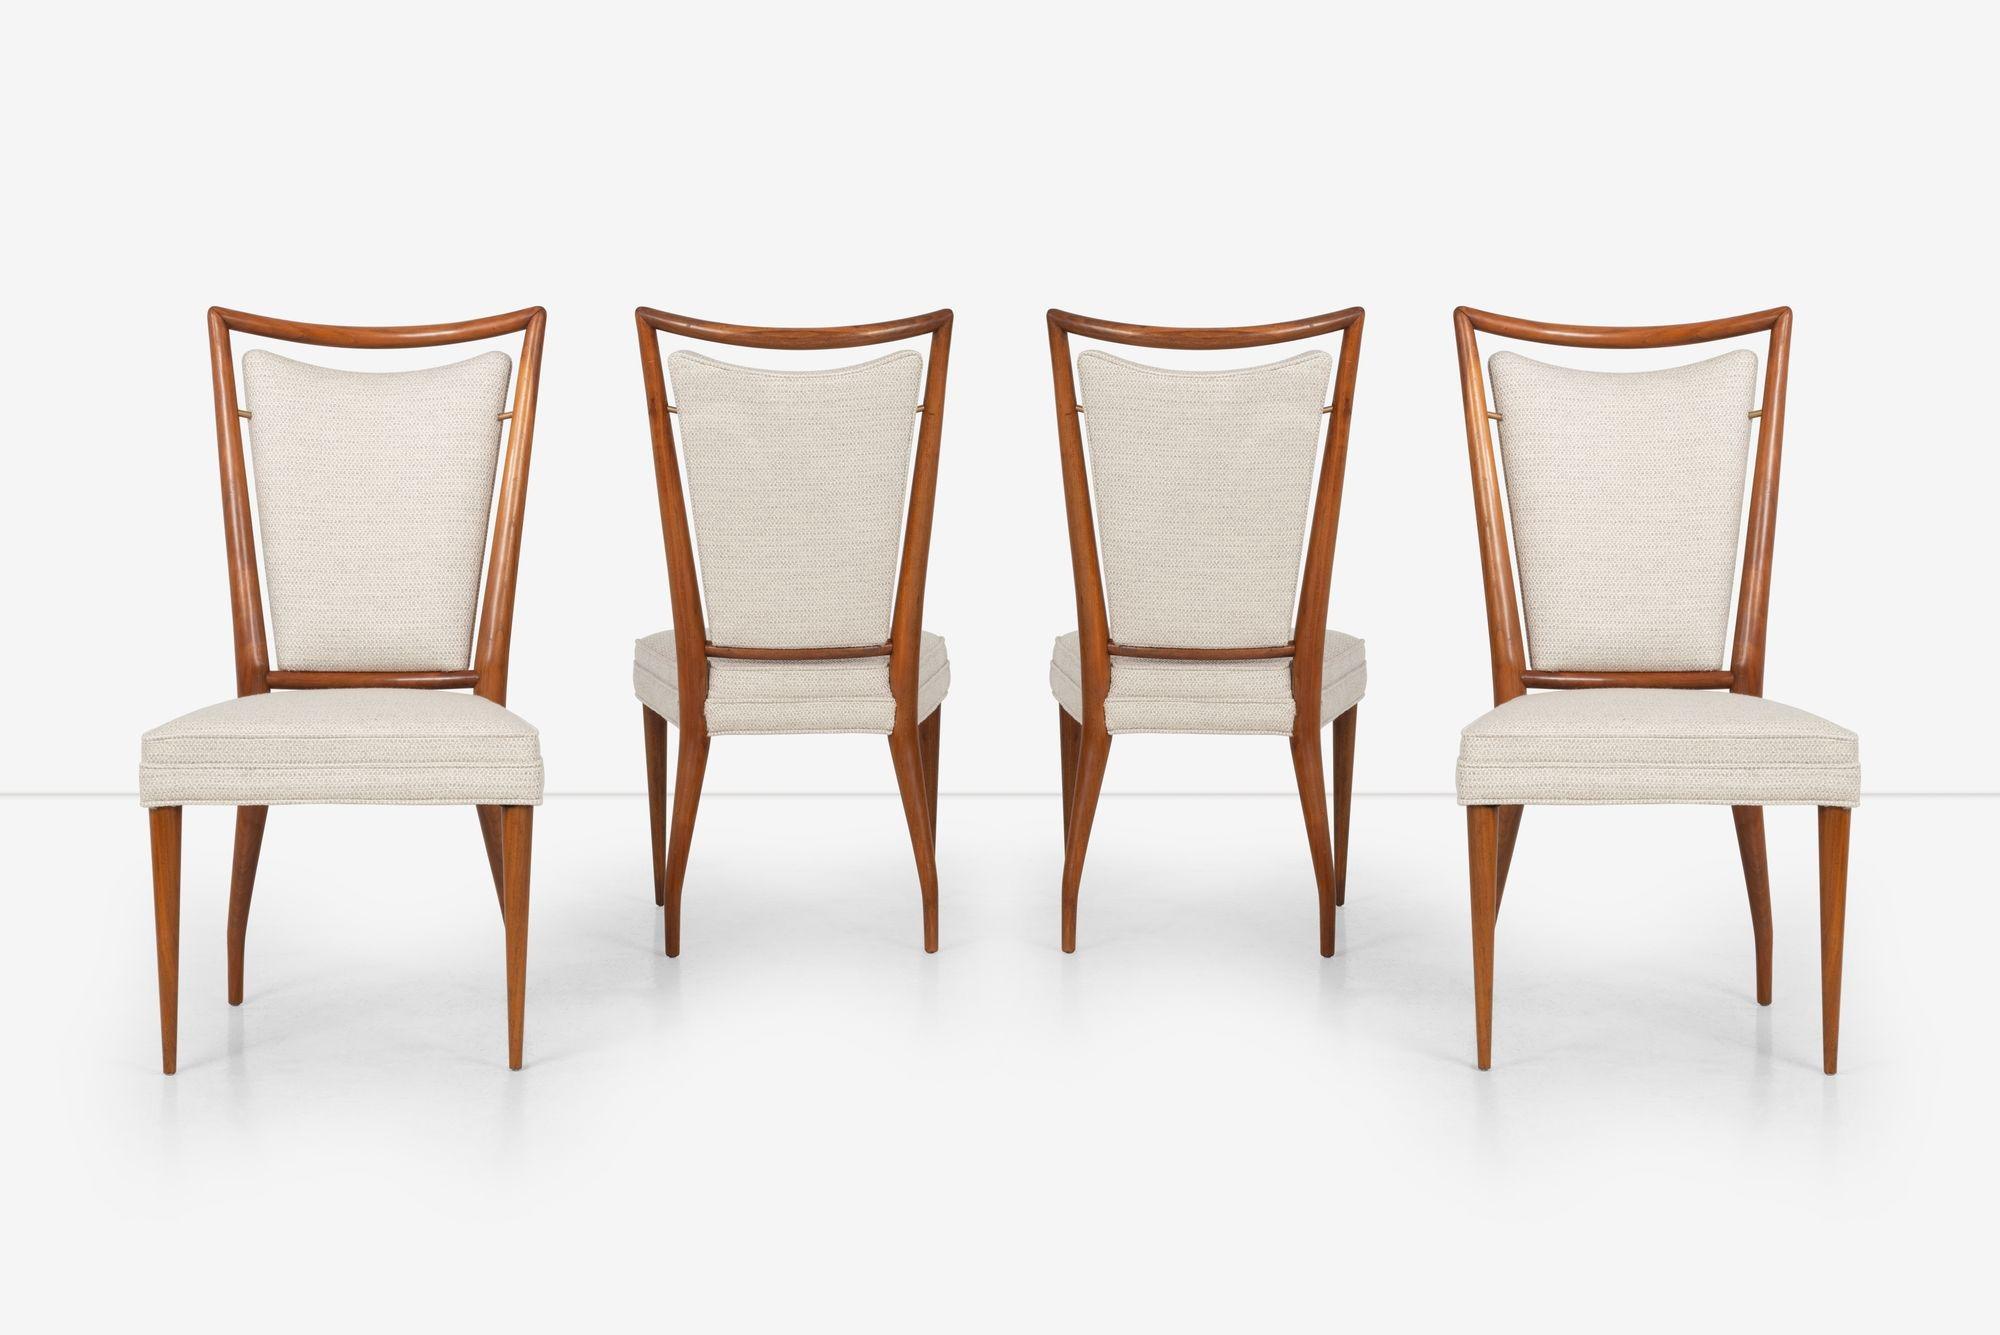 Mid-20th Century Pair of Six Dining Chairs by J. Stuart Clingman for Widdicomb For Sale